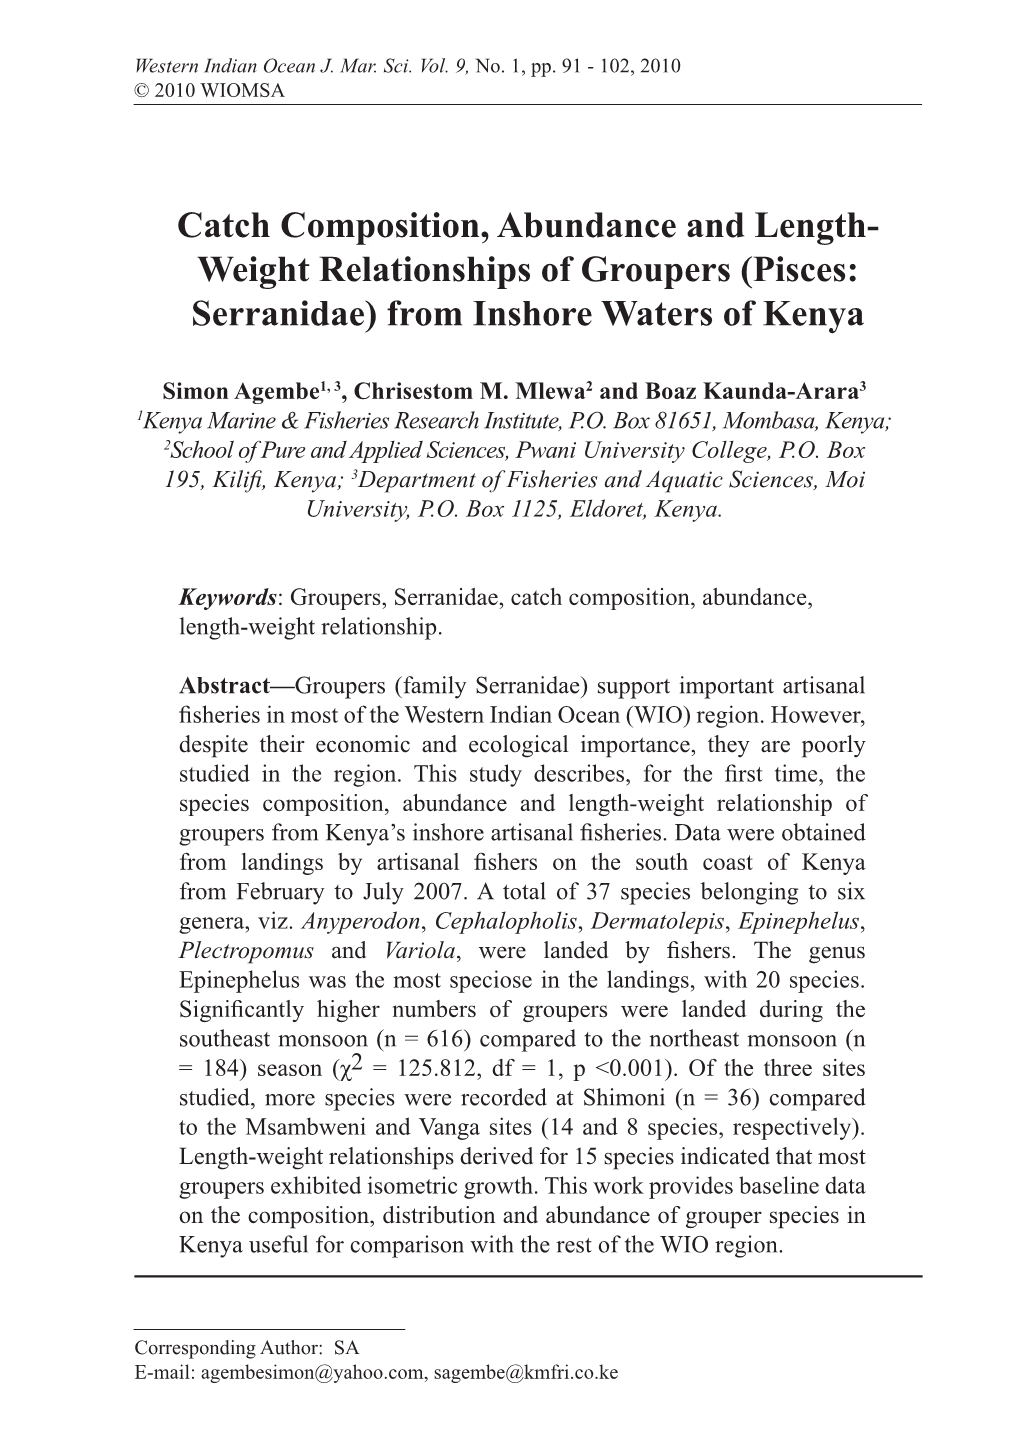 Catch Composition, Abundance and Length- Weight Relationships of Groupers (Pisces: Serranidae) from Inshore Waters of Kenya